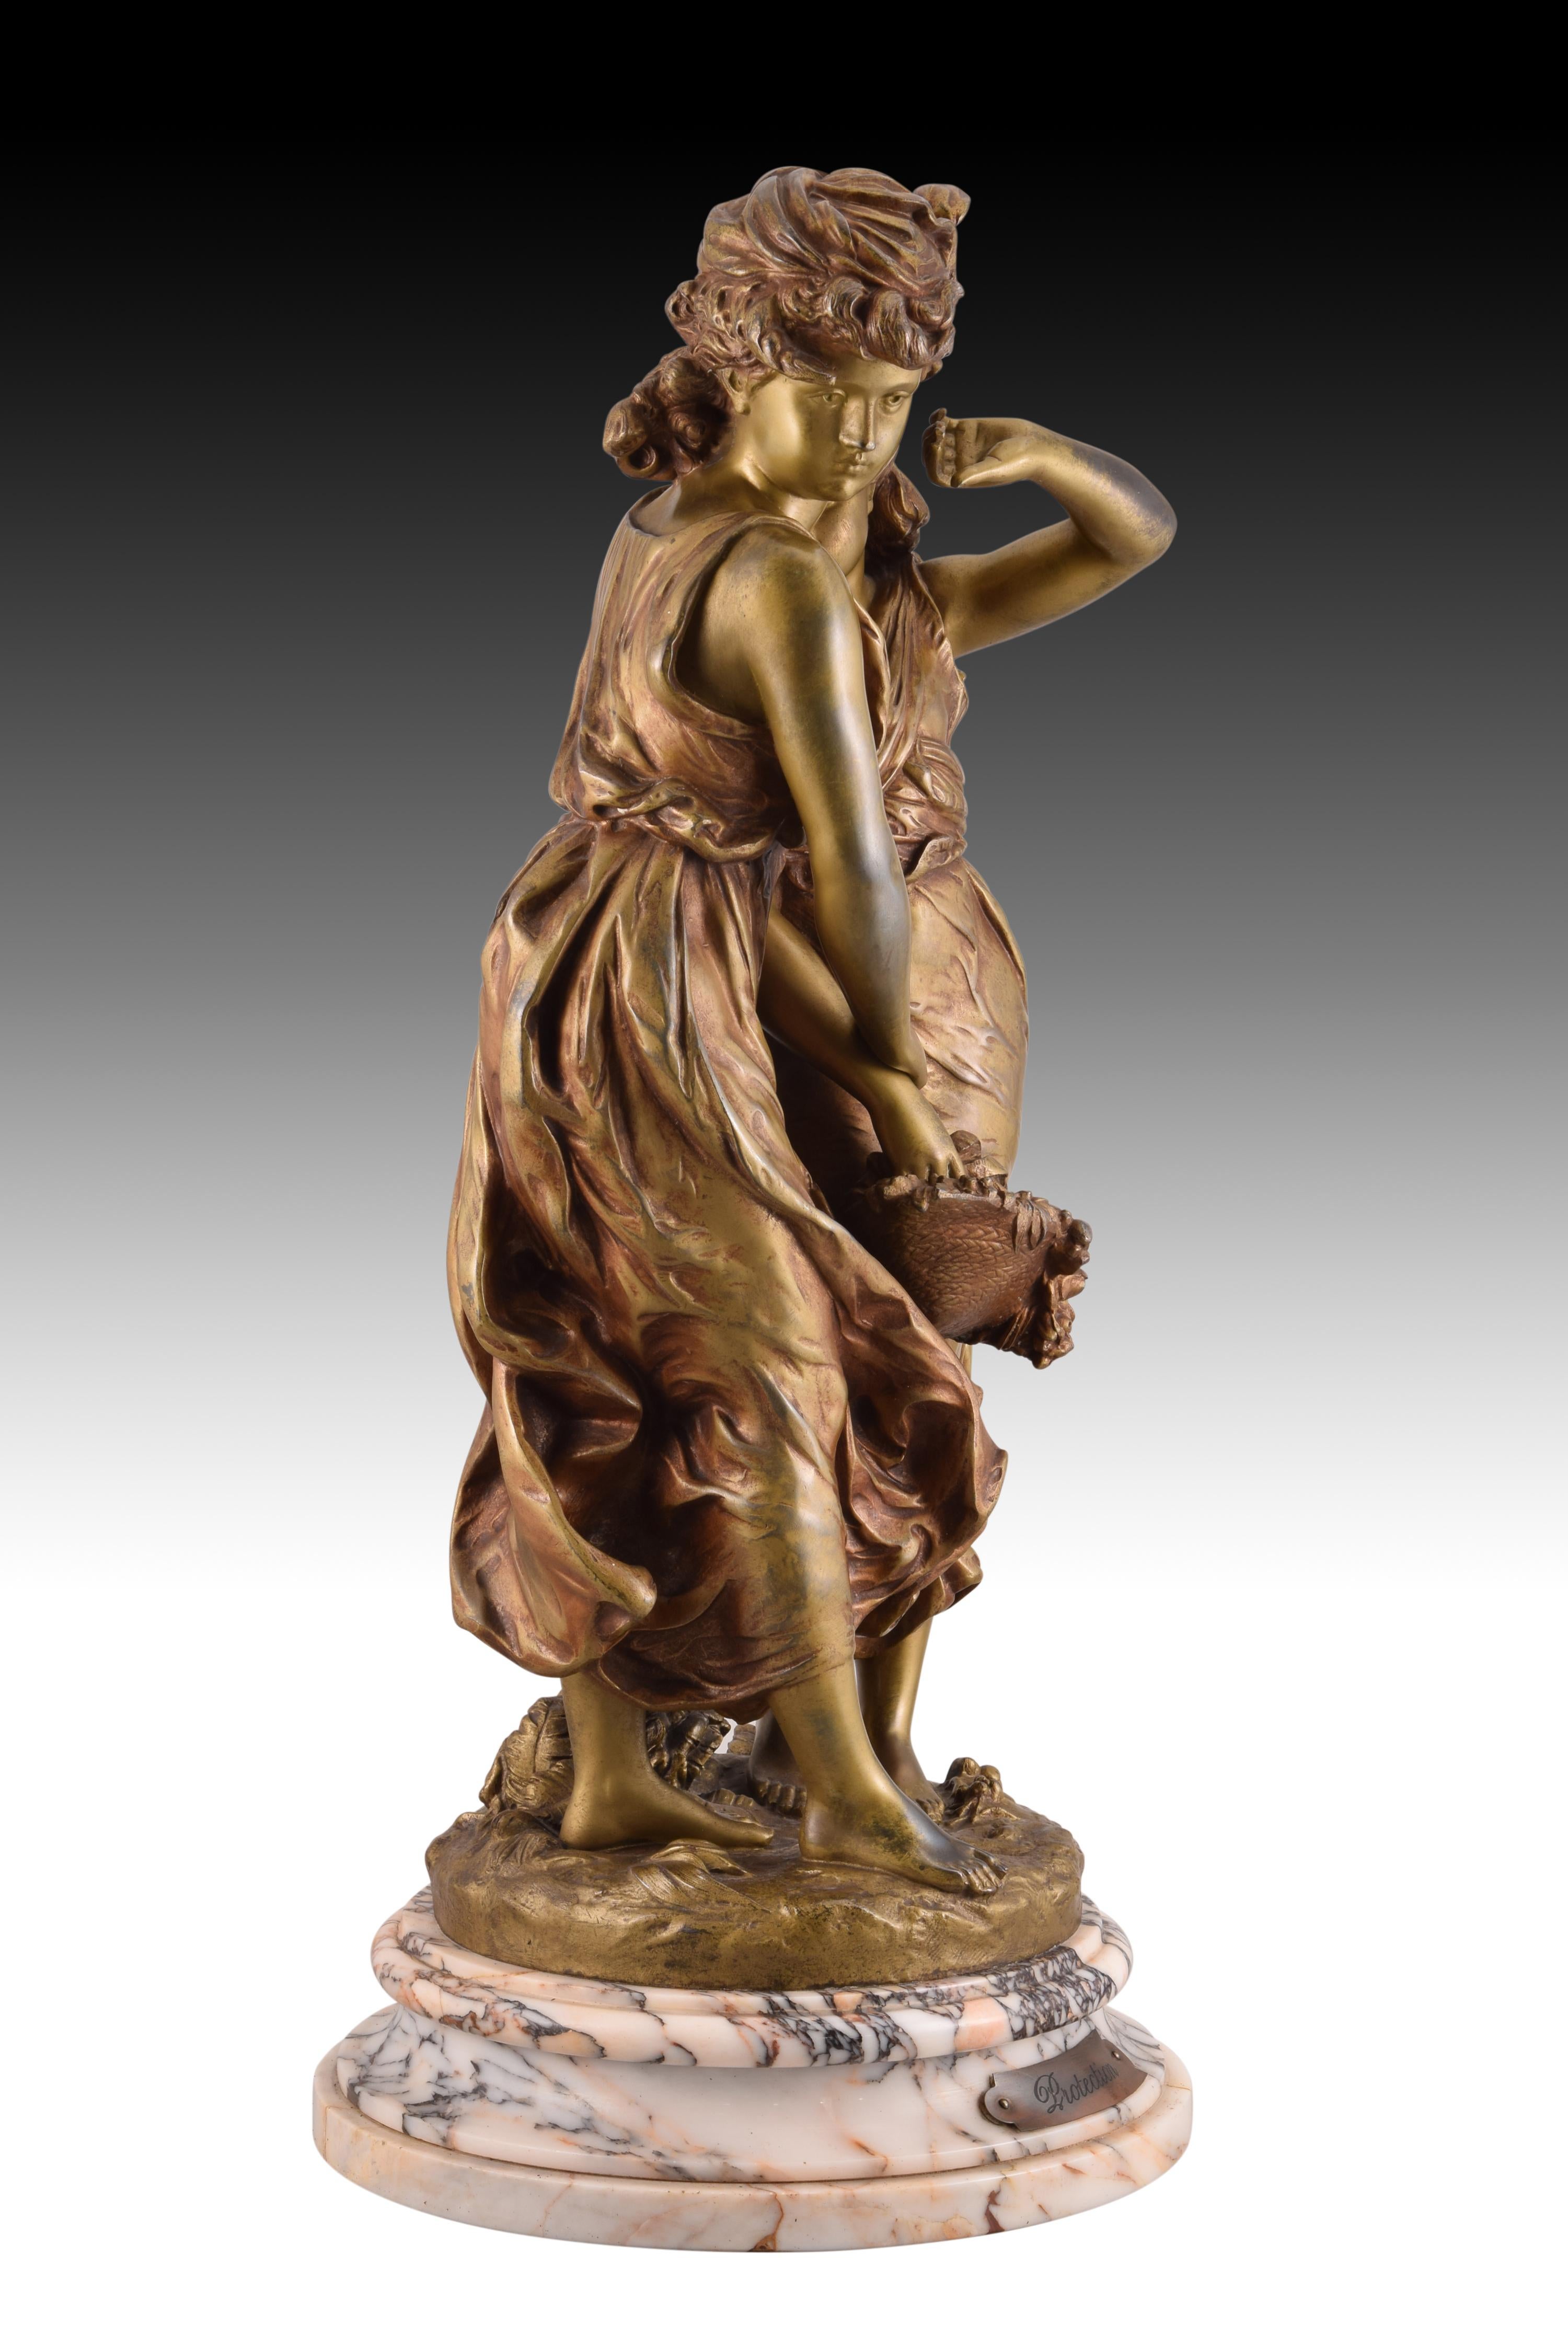 Protection. Bronze, marble. Following models of MOREAU, Hippolyte François (France, 1832-1927). France, around 1900. 
Signature on base. With foundry seal. 
The piece has a circular base, with simple moldings and a plaque with the title of the